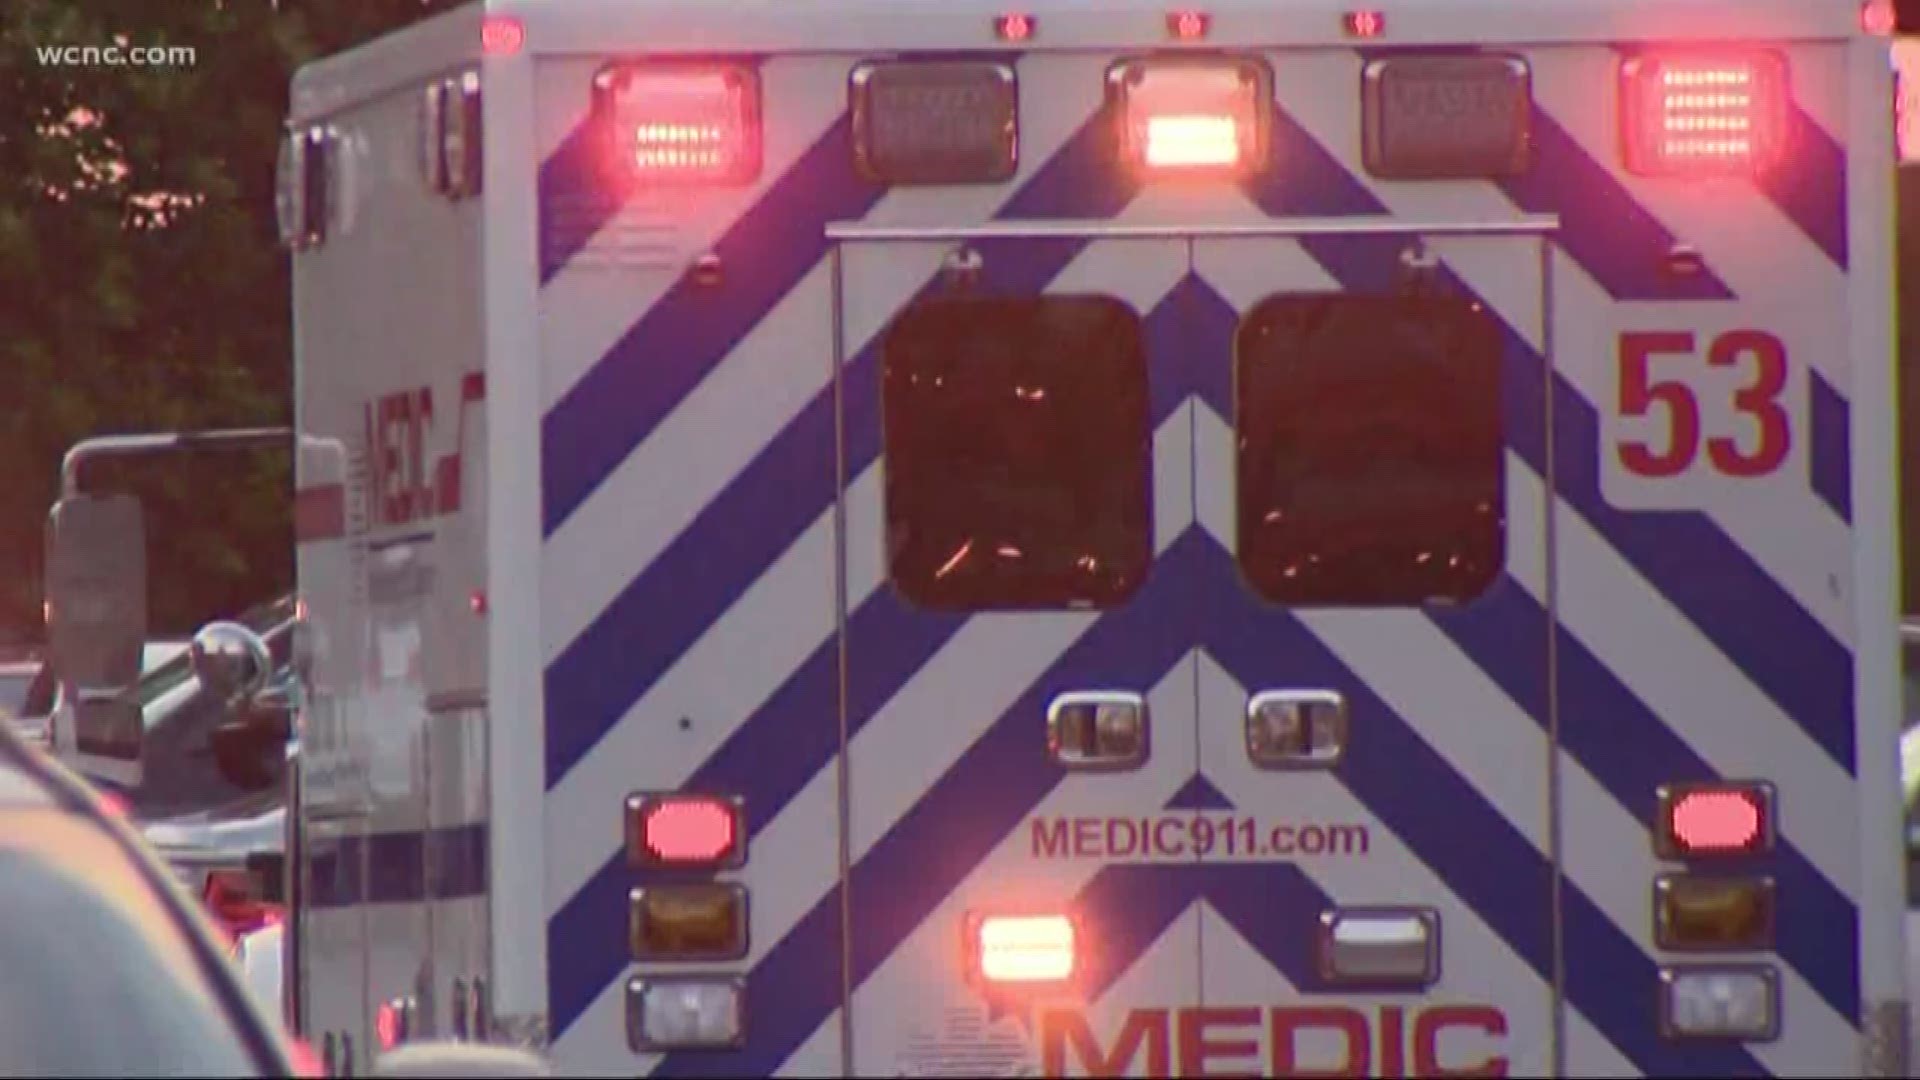 It comes on the heels of NBC Charlotte Defenders' investigation that uncovered engine issues in half of Medic's fleet.